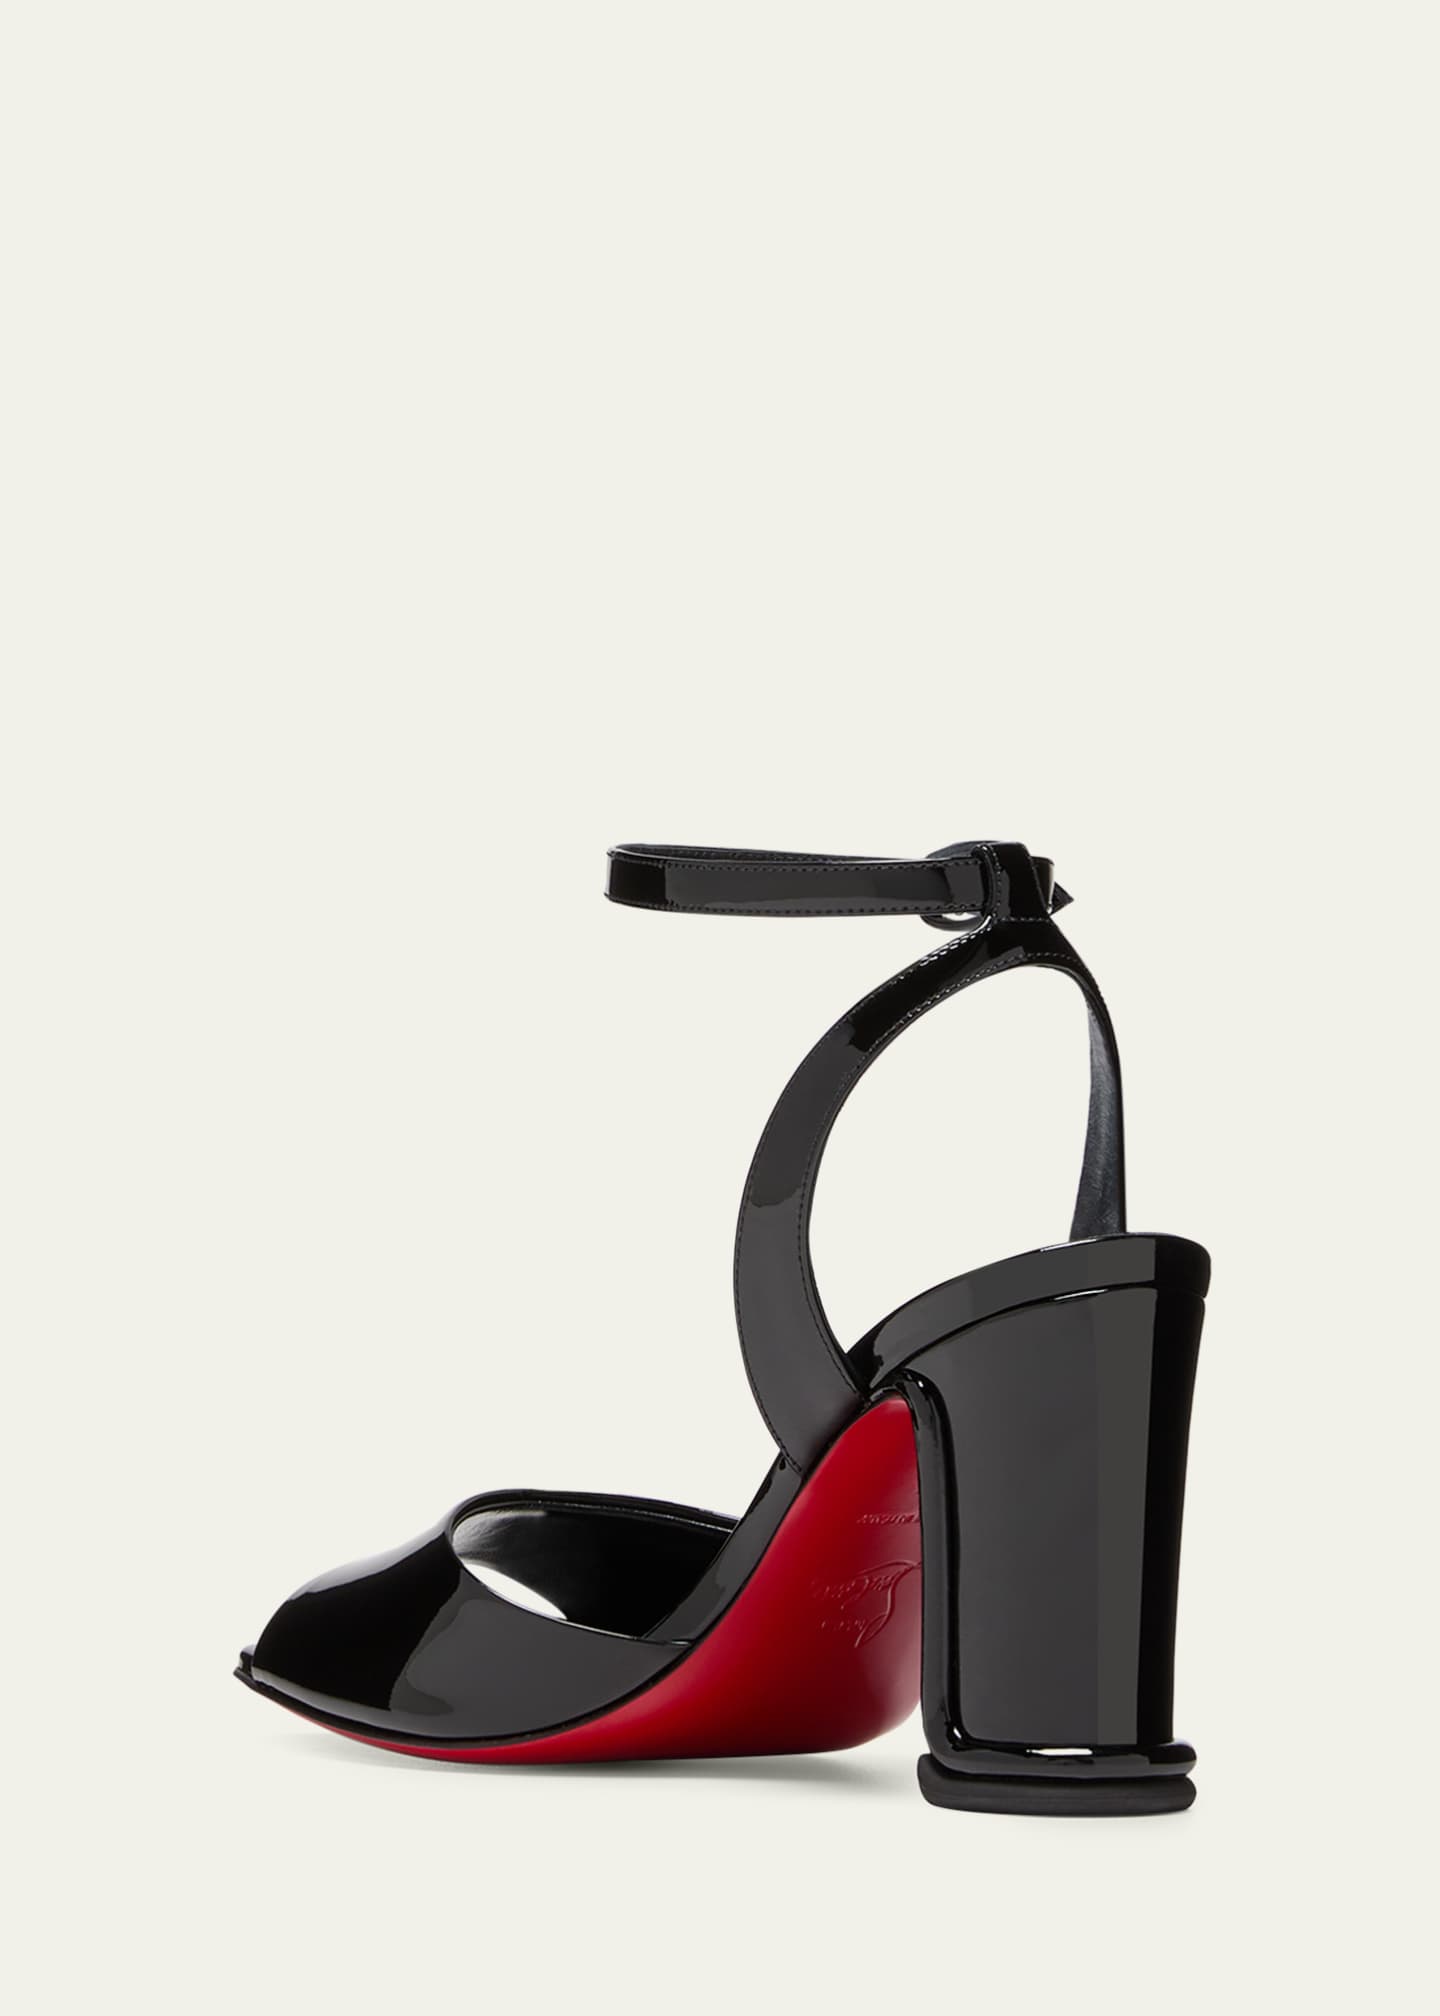 Christian Louboutin Womens Heeled Sandals, Red, Stock Check Required 40.5